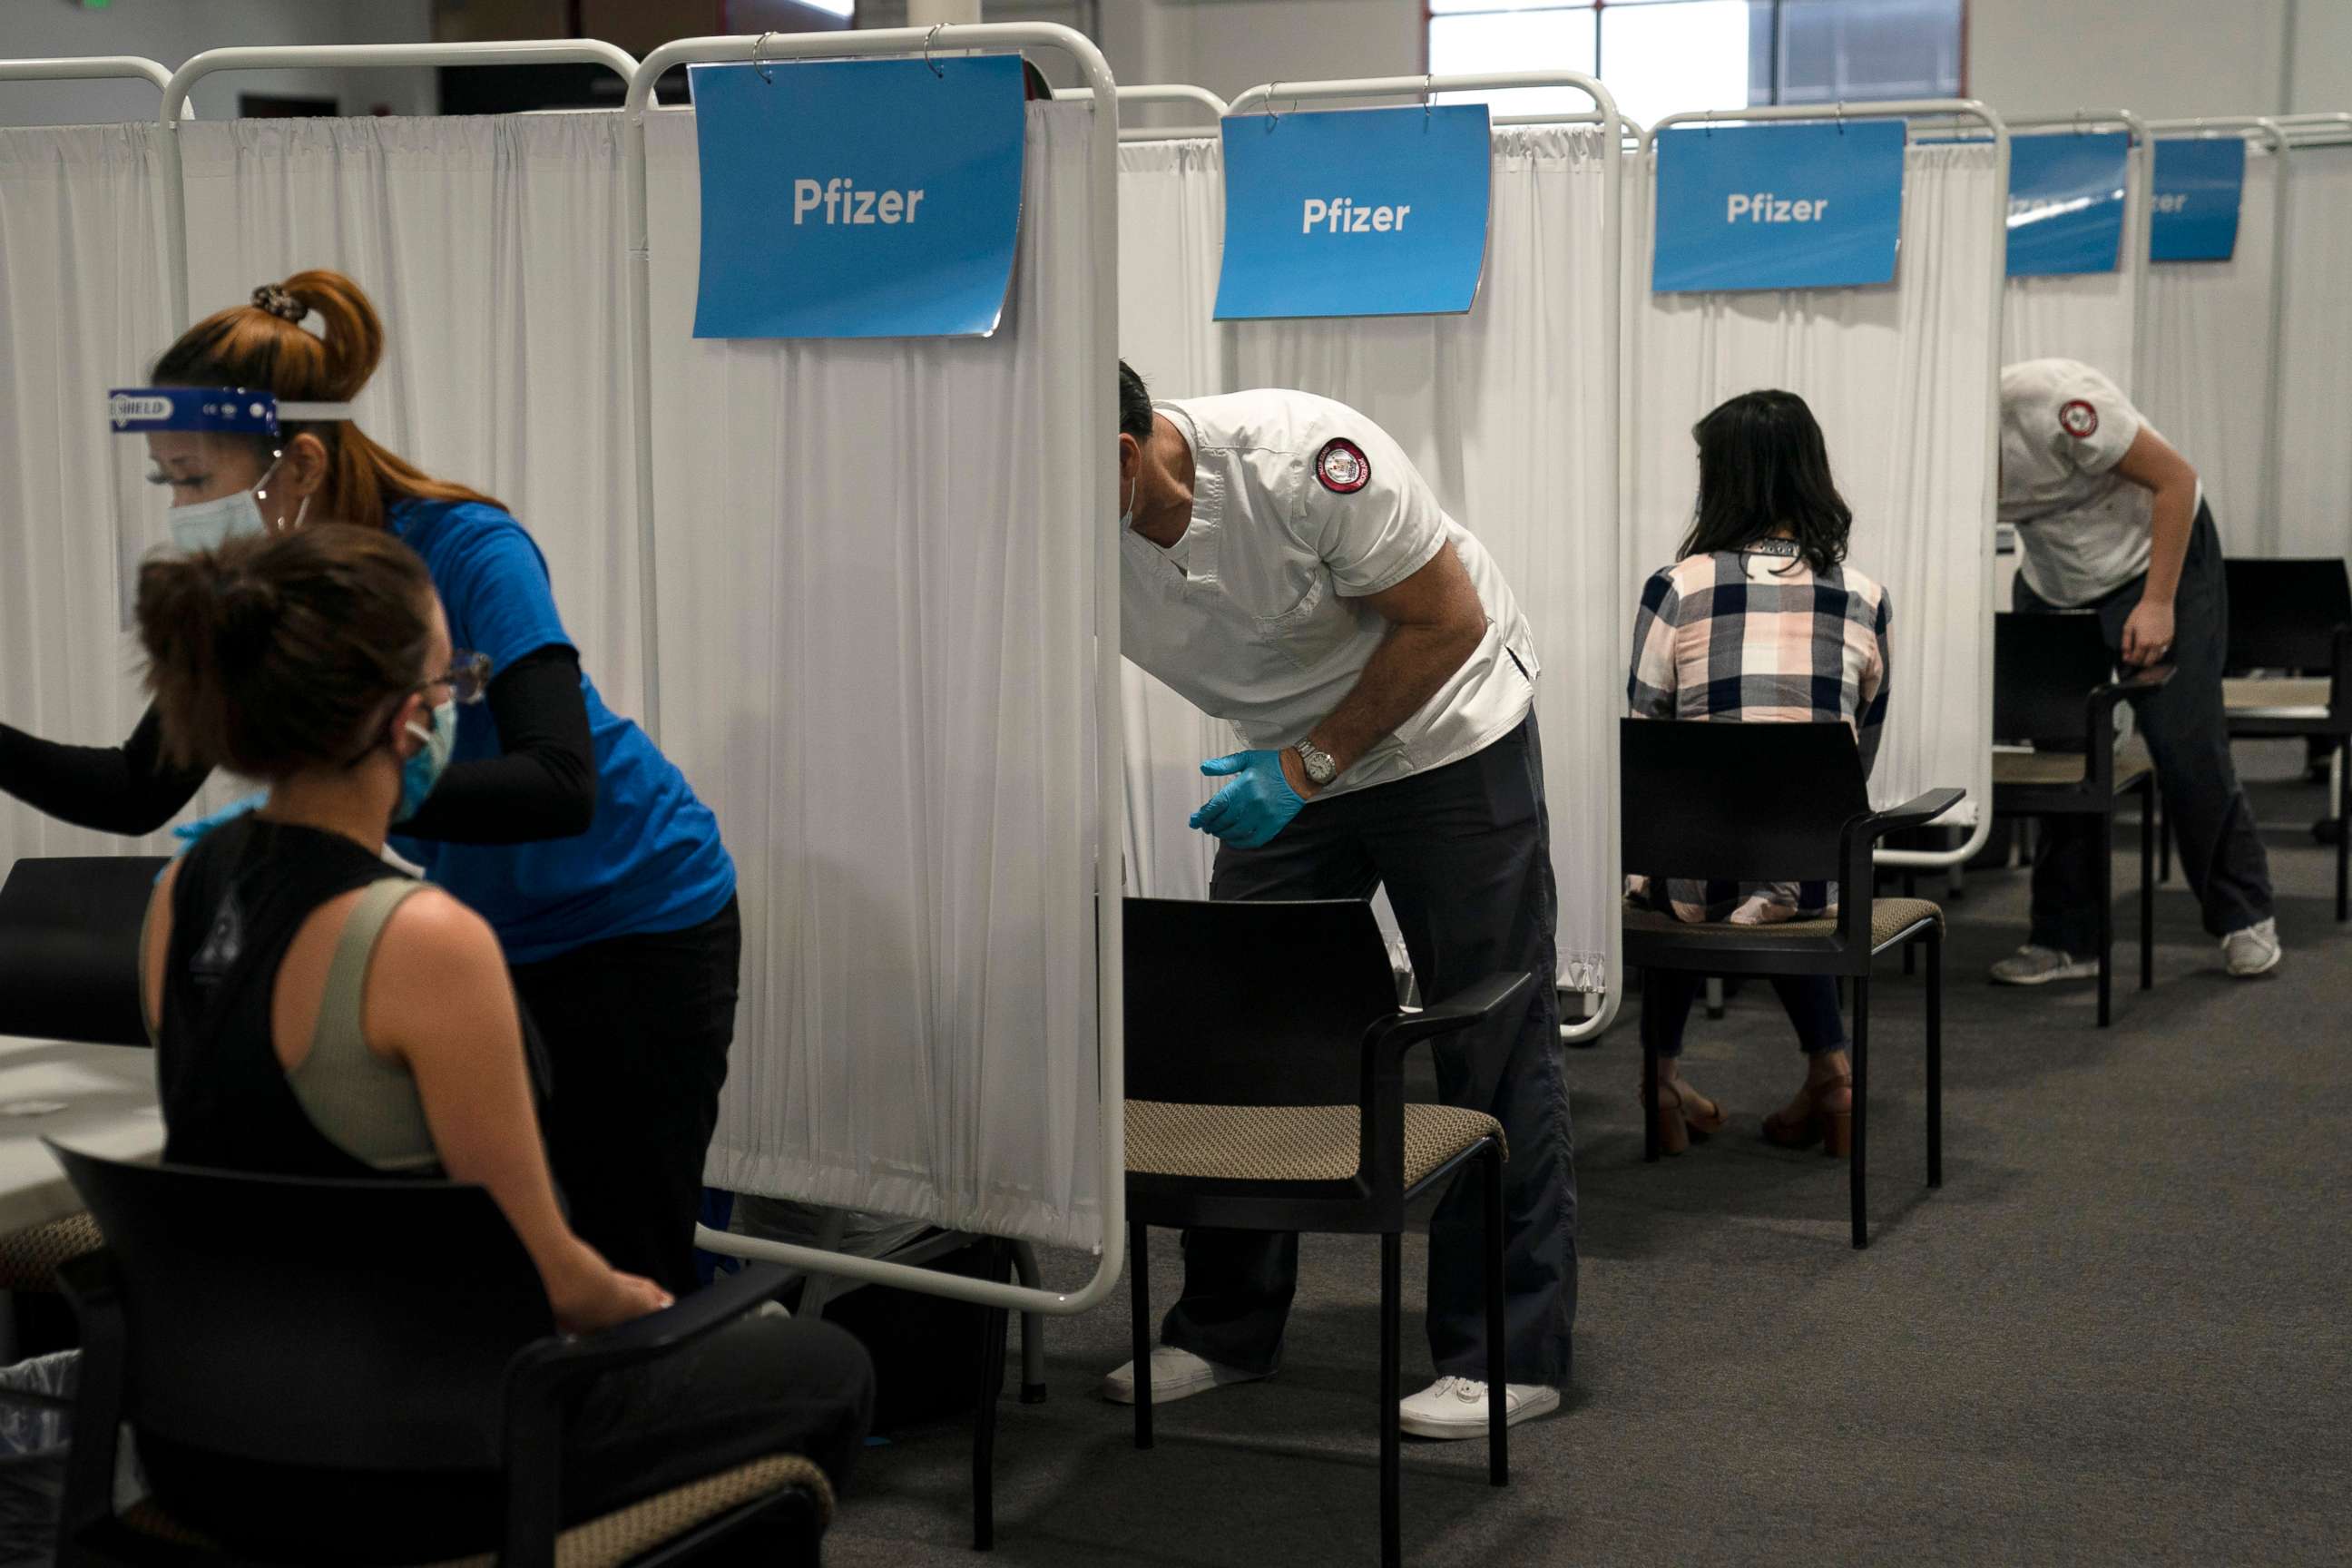 PHOTO: Student nurse Dario Gomez, center, disinfects a chair after administering the Pfizer COVID-19 vaccine to a patient at Providence Edwards Lifesciences vaccination site in Santa Ana, Calif., May 21, 2021.